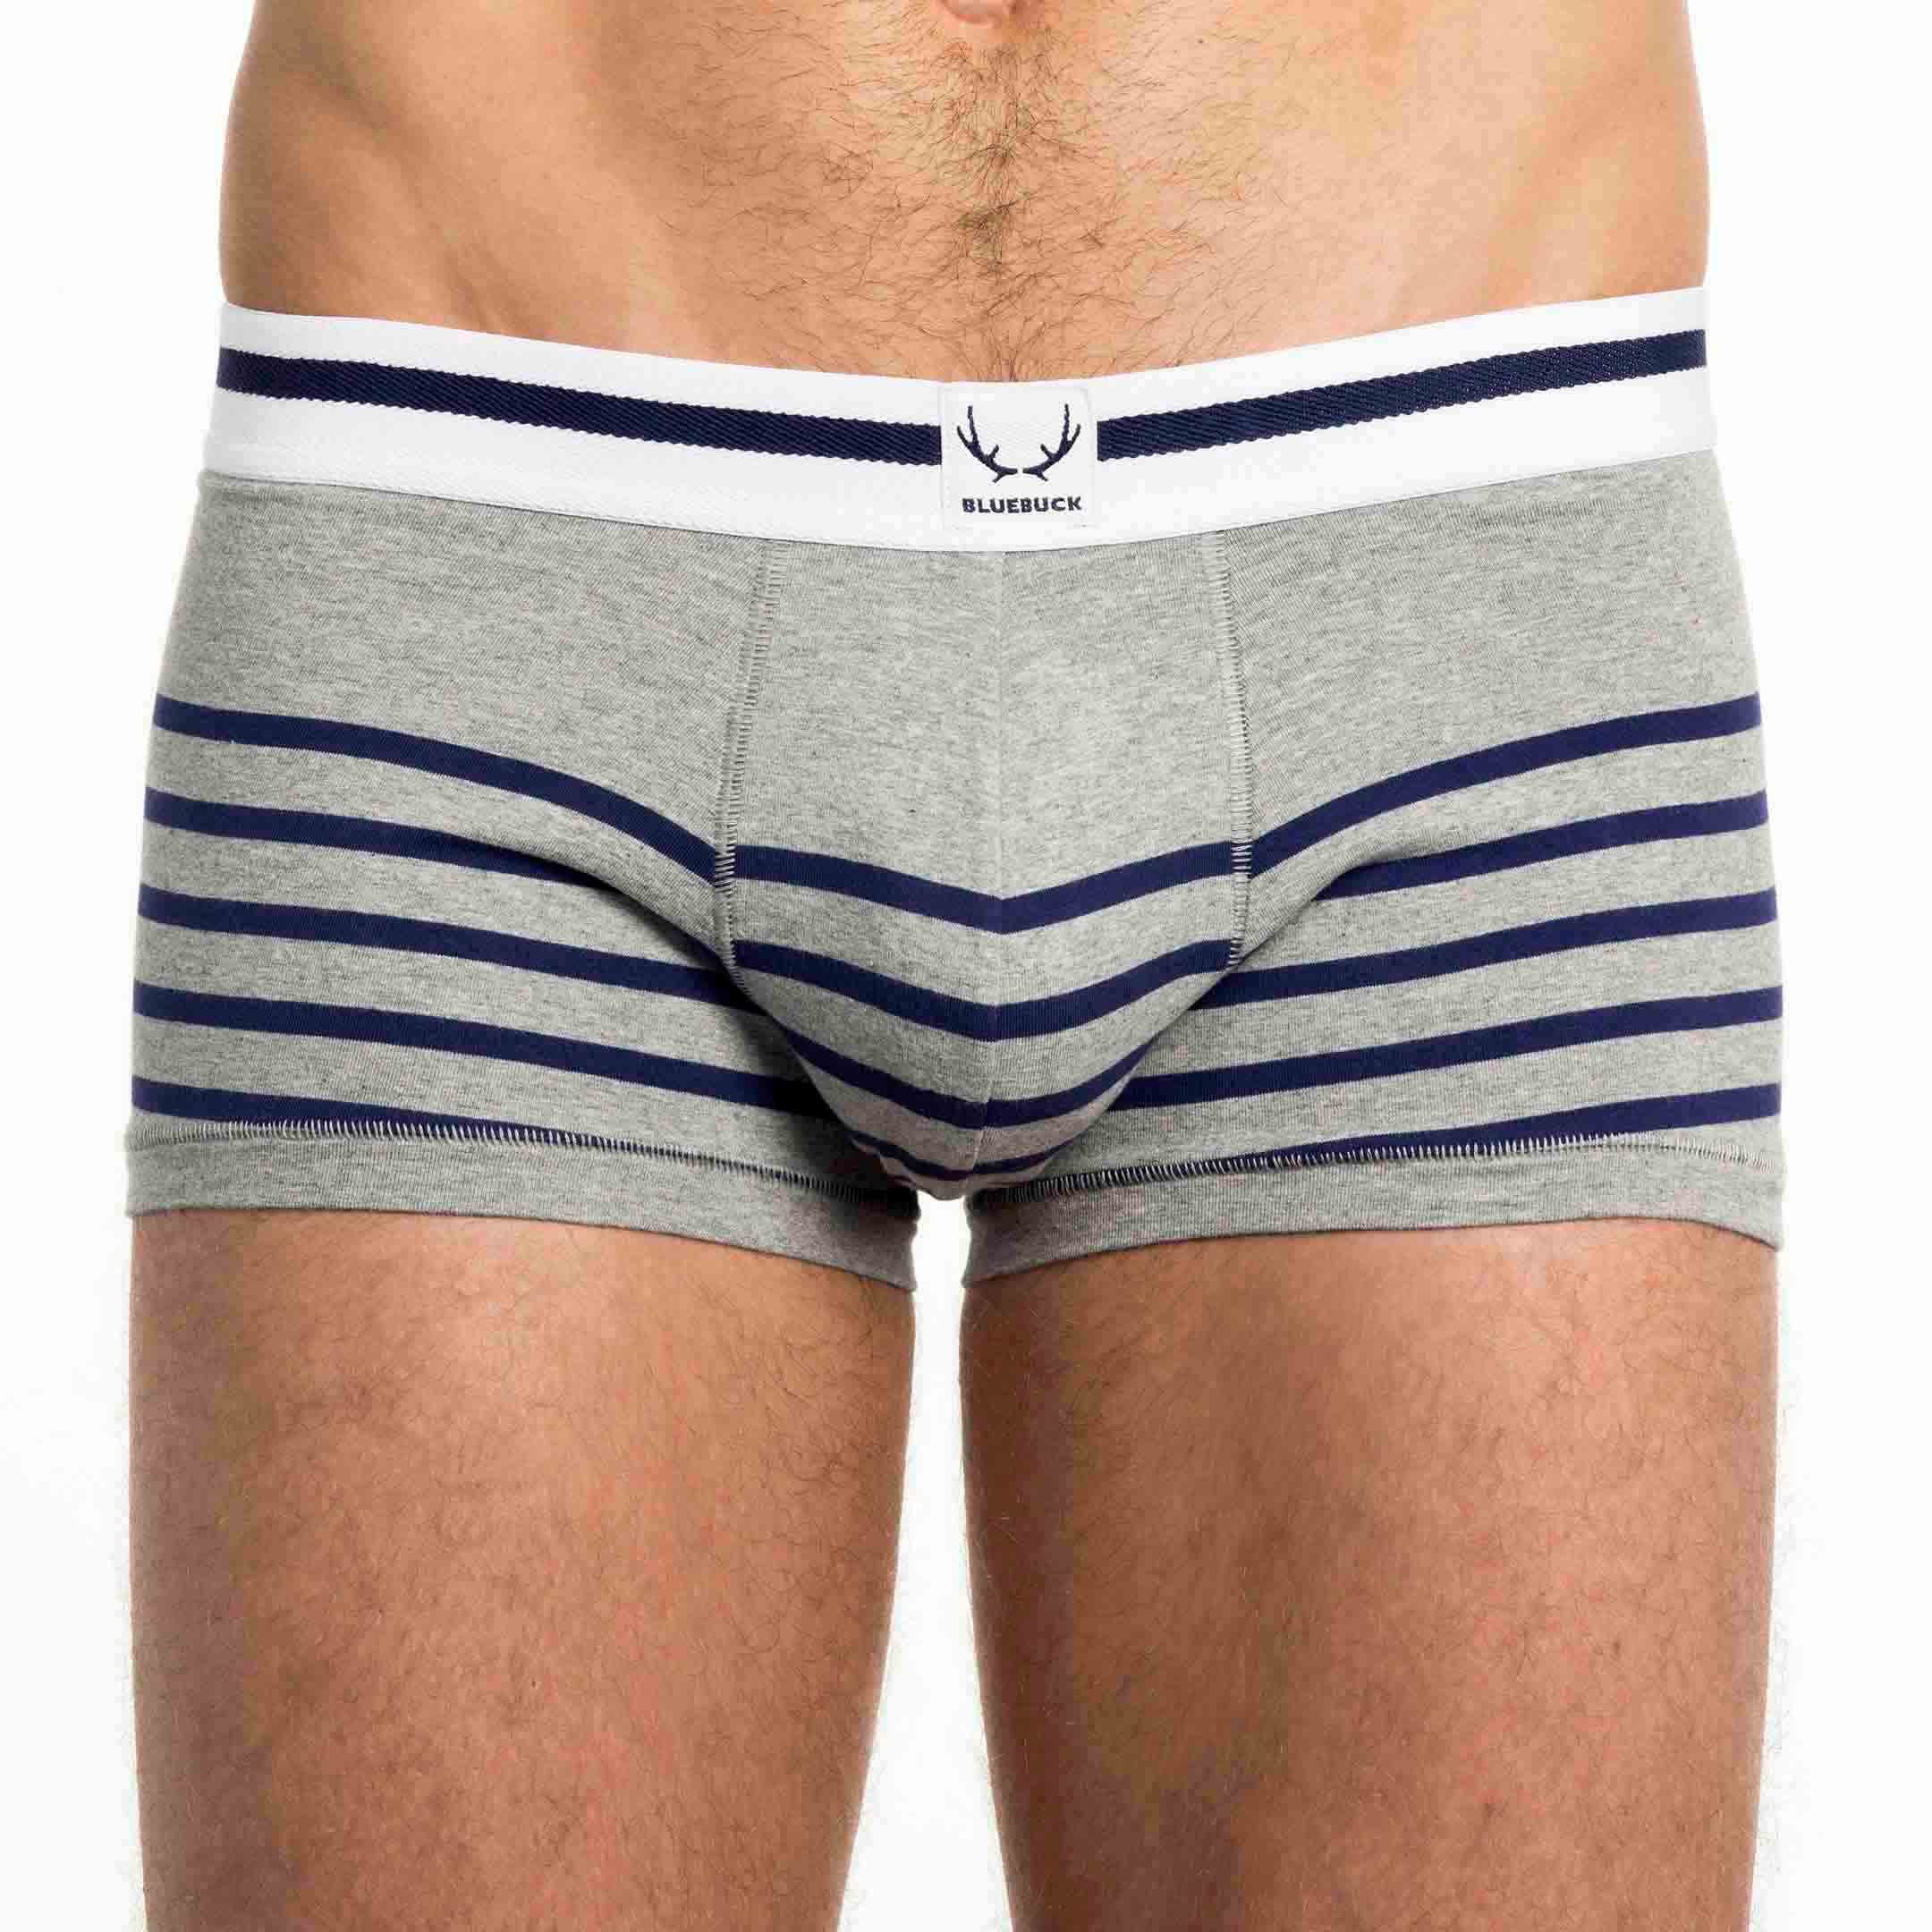 Gray and blue striped boxer shorts made of organic cotton from Bluebuck